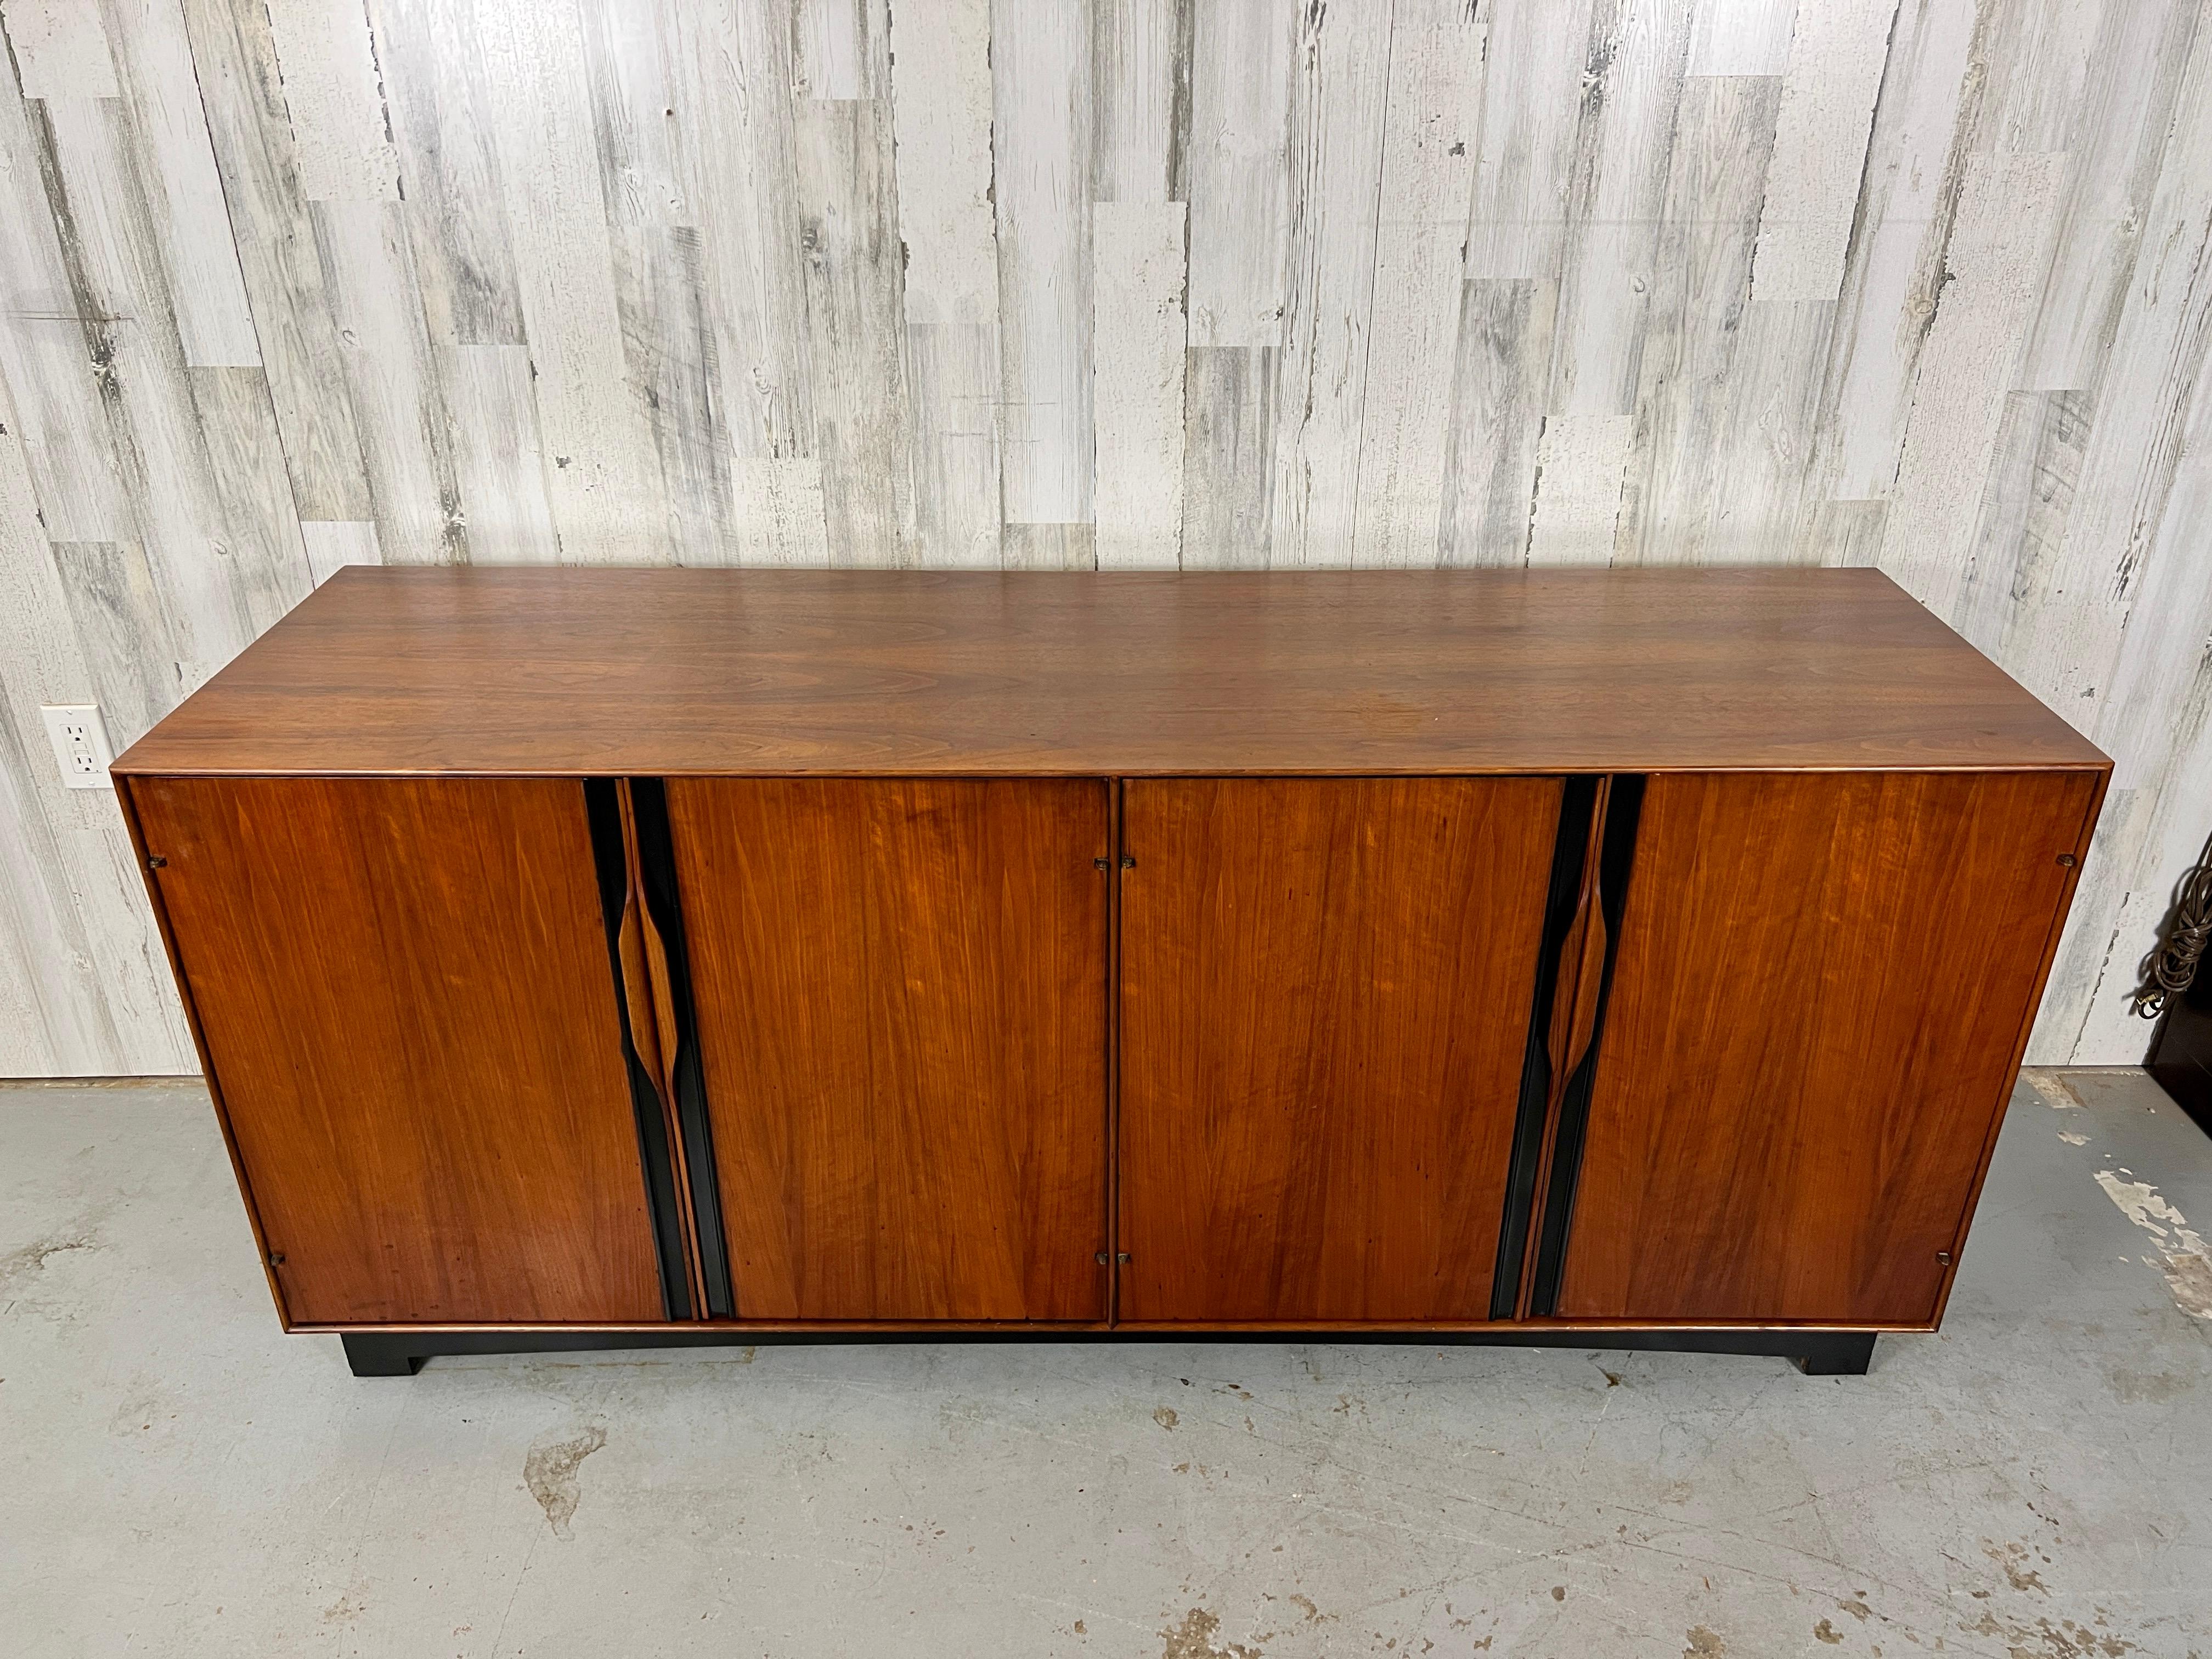 Four door credenza with sculpted walnut handles that open to shelves and drawers.
Beautiful black accents on the doors and base make the walnut pop.
Designed by John Kapel for Glenn of California furniture.